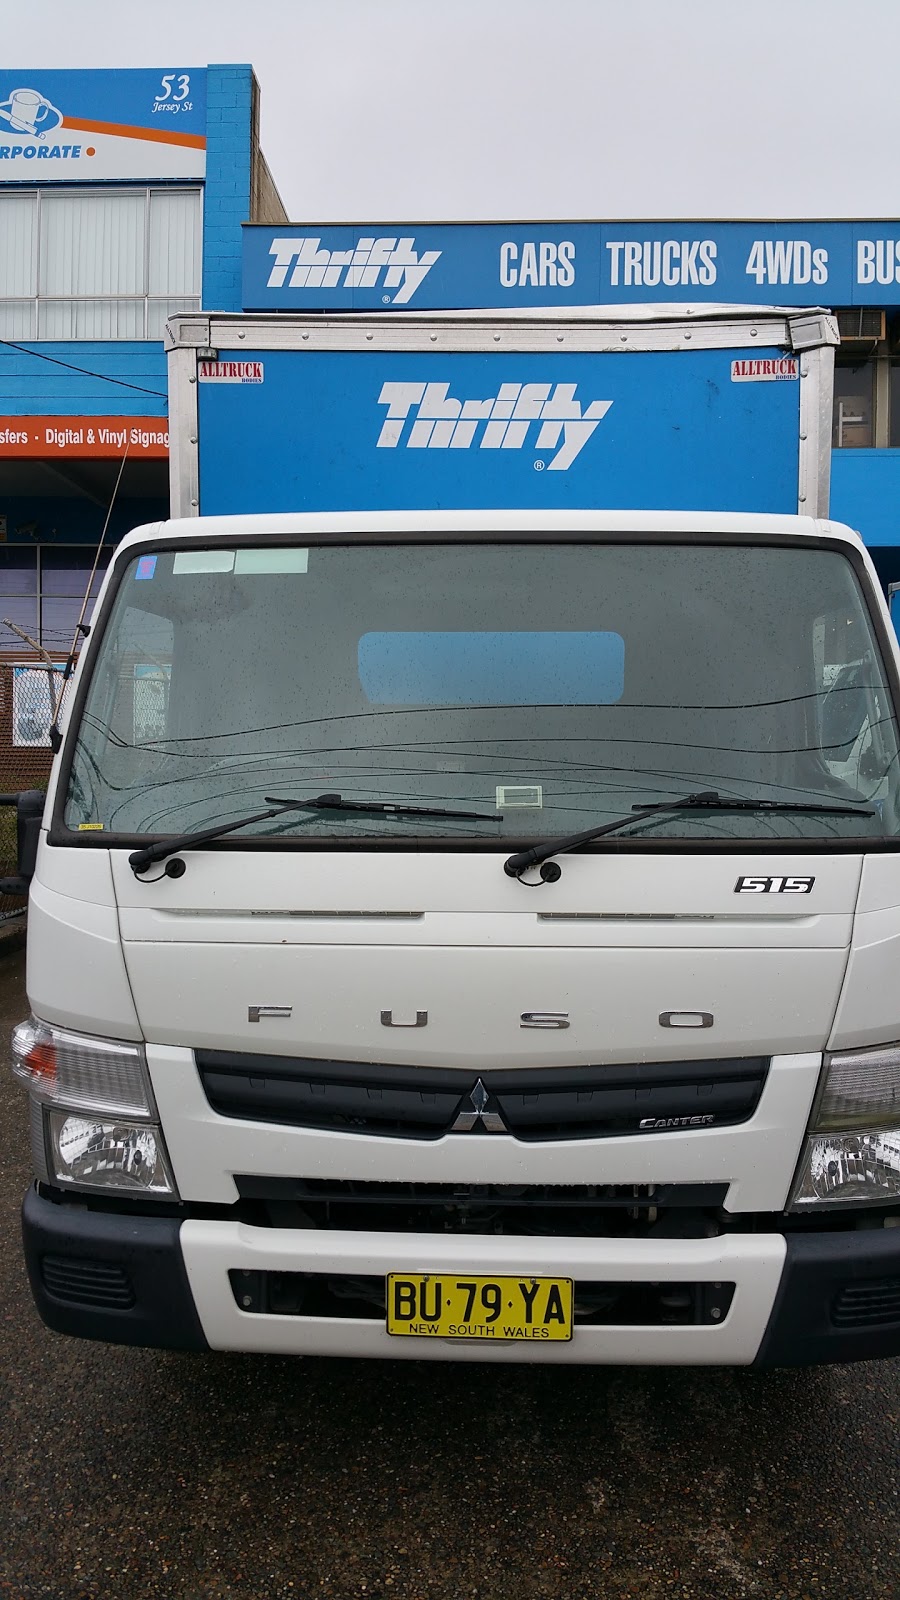 Thrifty Car & Truck Rental Hornsby | 55 Jersey St, Hornsby NSW 2077, Australia | Phone: (02) 9450 7688